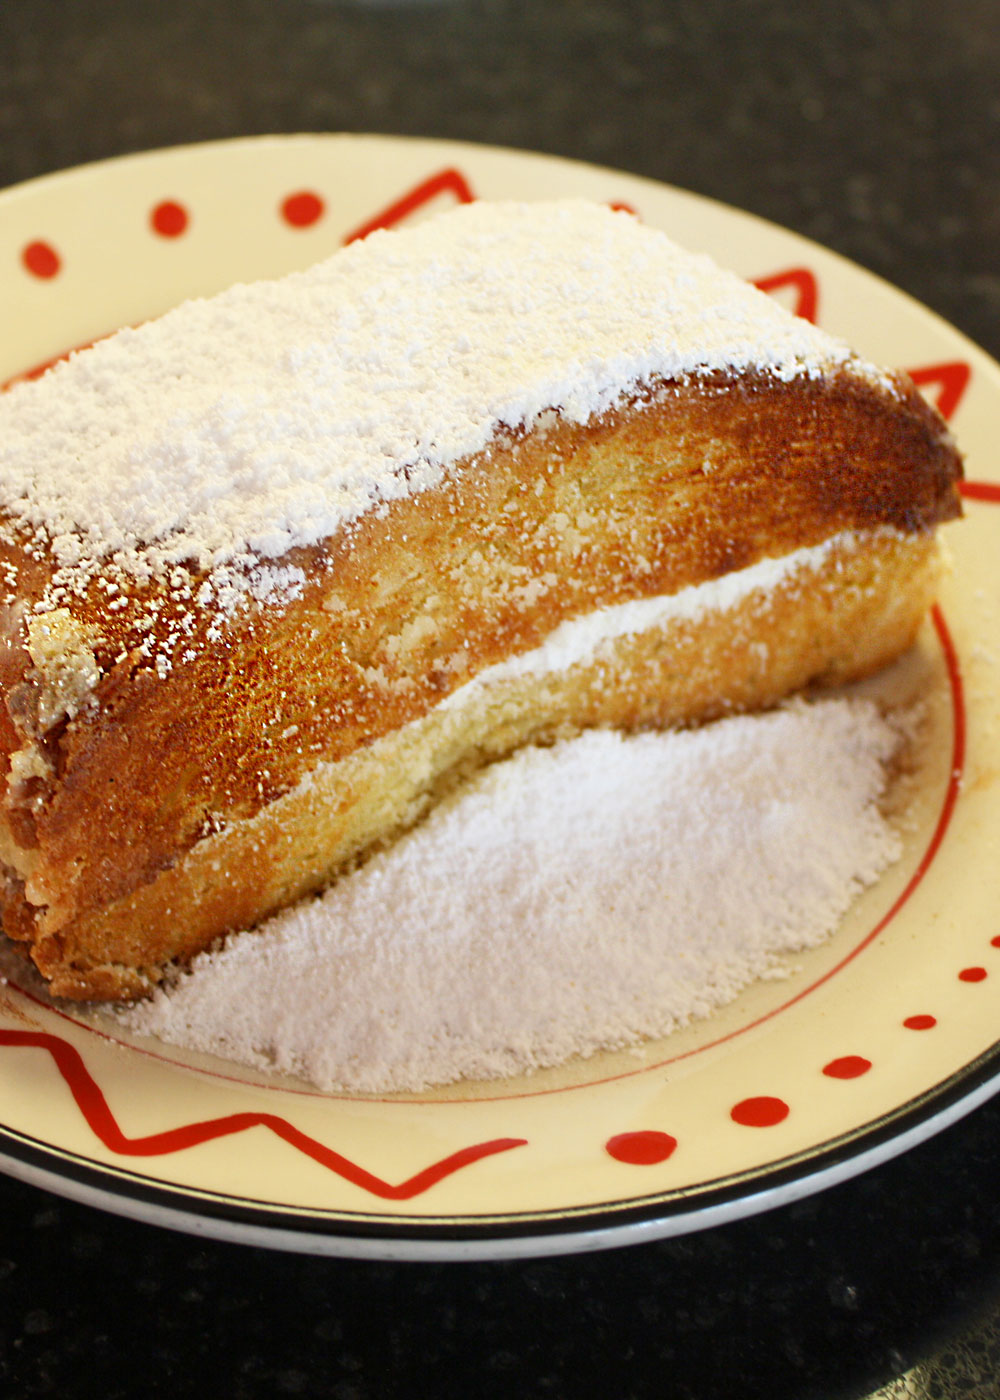 A toasted Tuffy's roll on a plate, dusted with powdered sugar